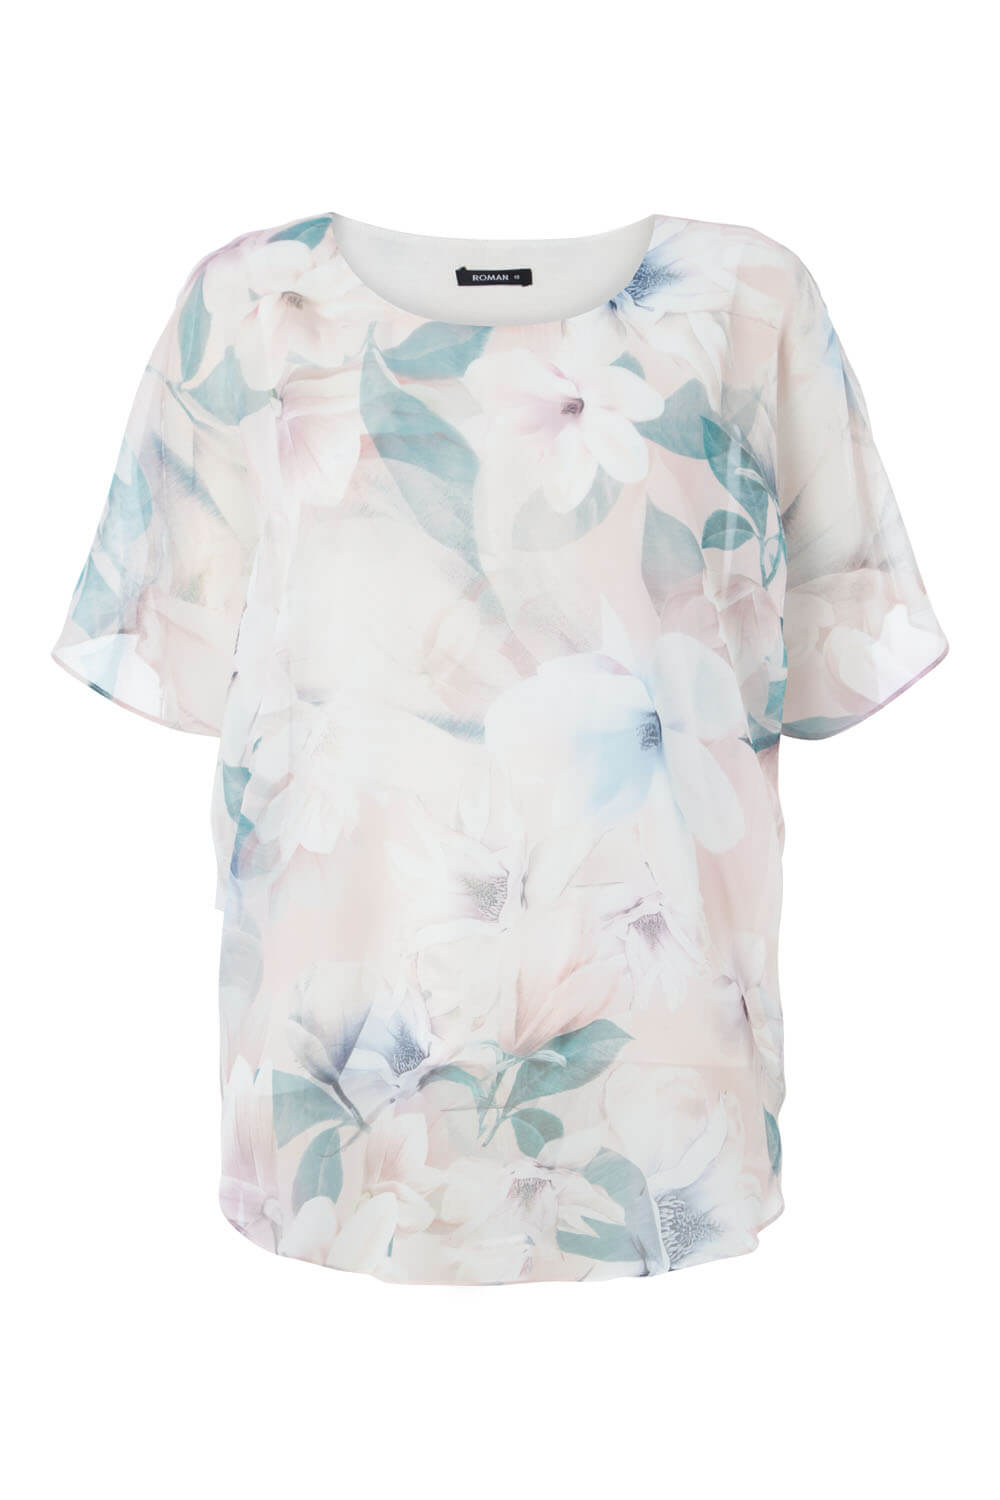 Light Pink Floral Chiffon Overlay Top , Image 4 of 8